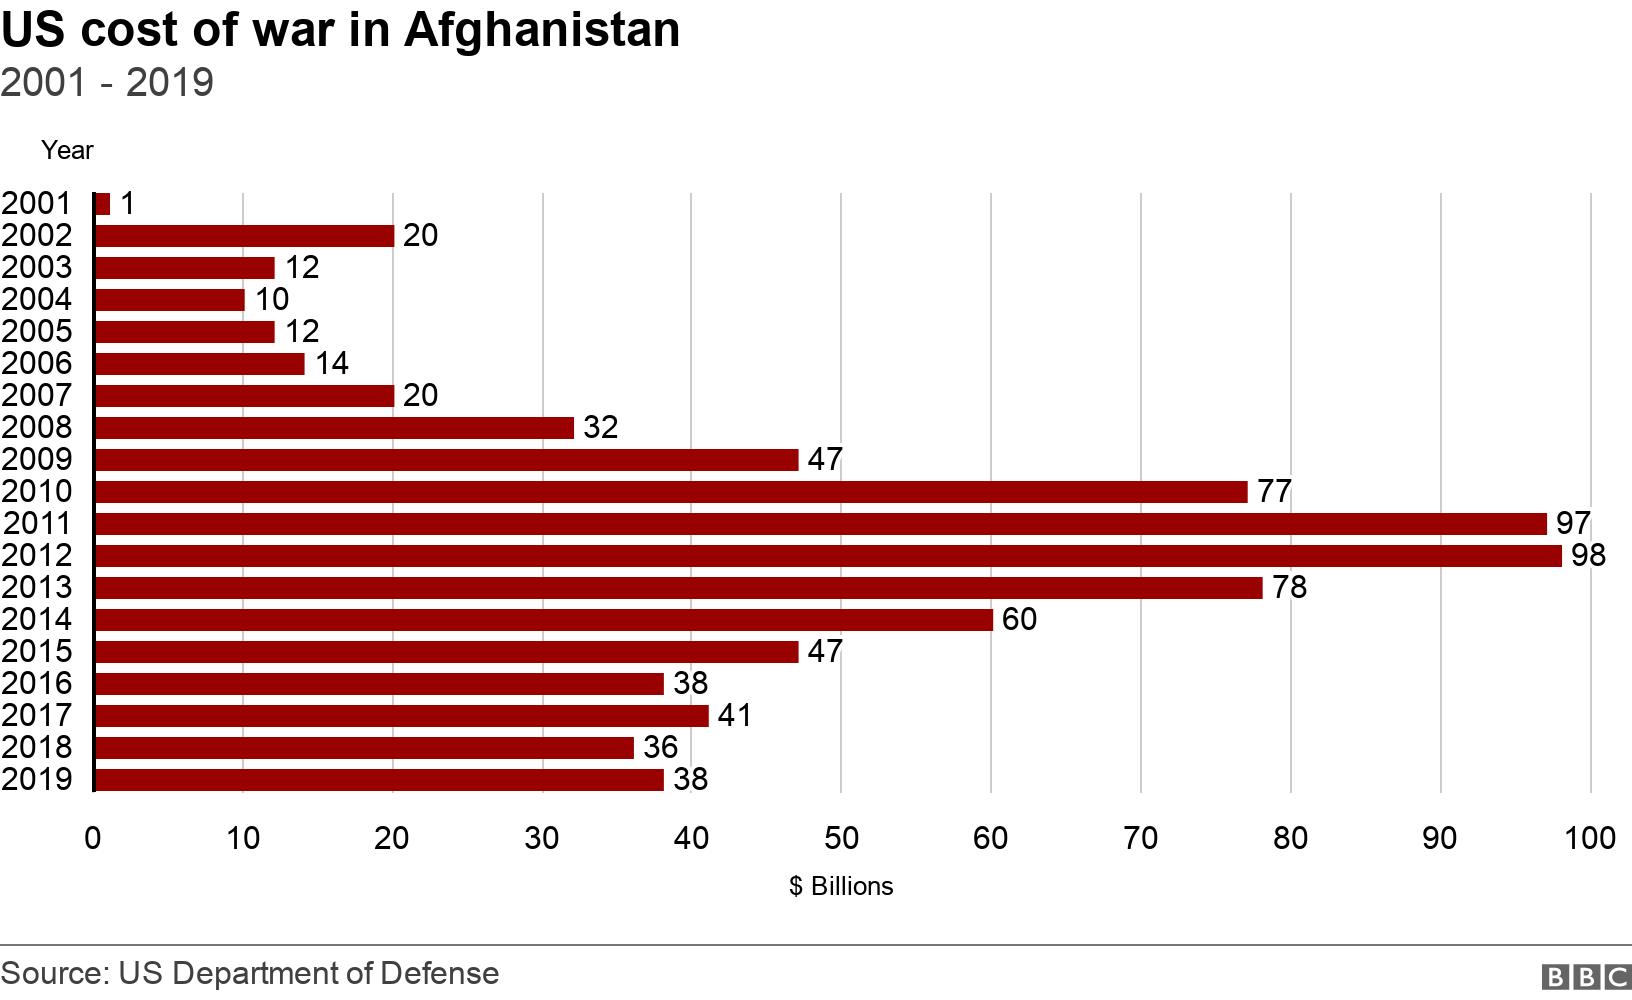 US cost of war in Afghanistan. 2001 - 2019. Data showing US cost of war in Afghanistan from 2001 to 2019 .